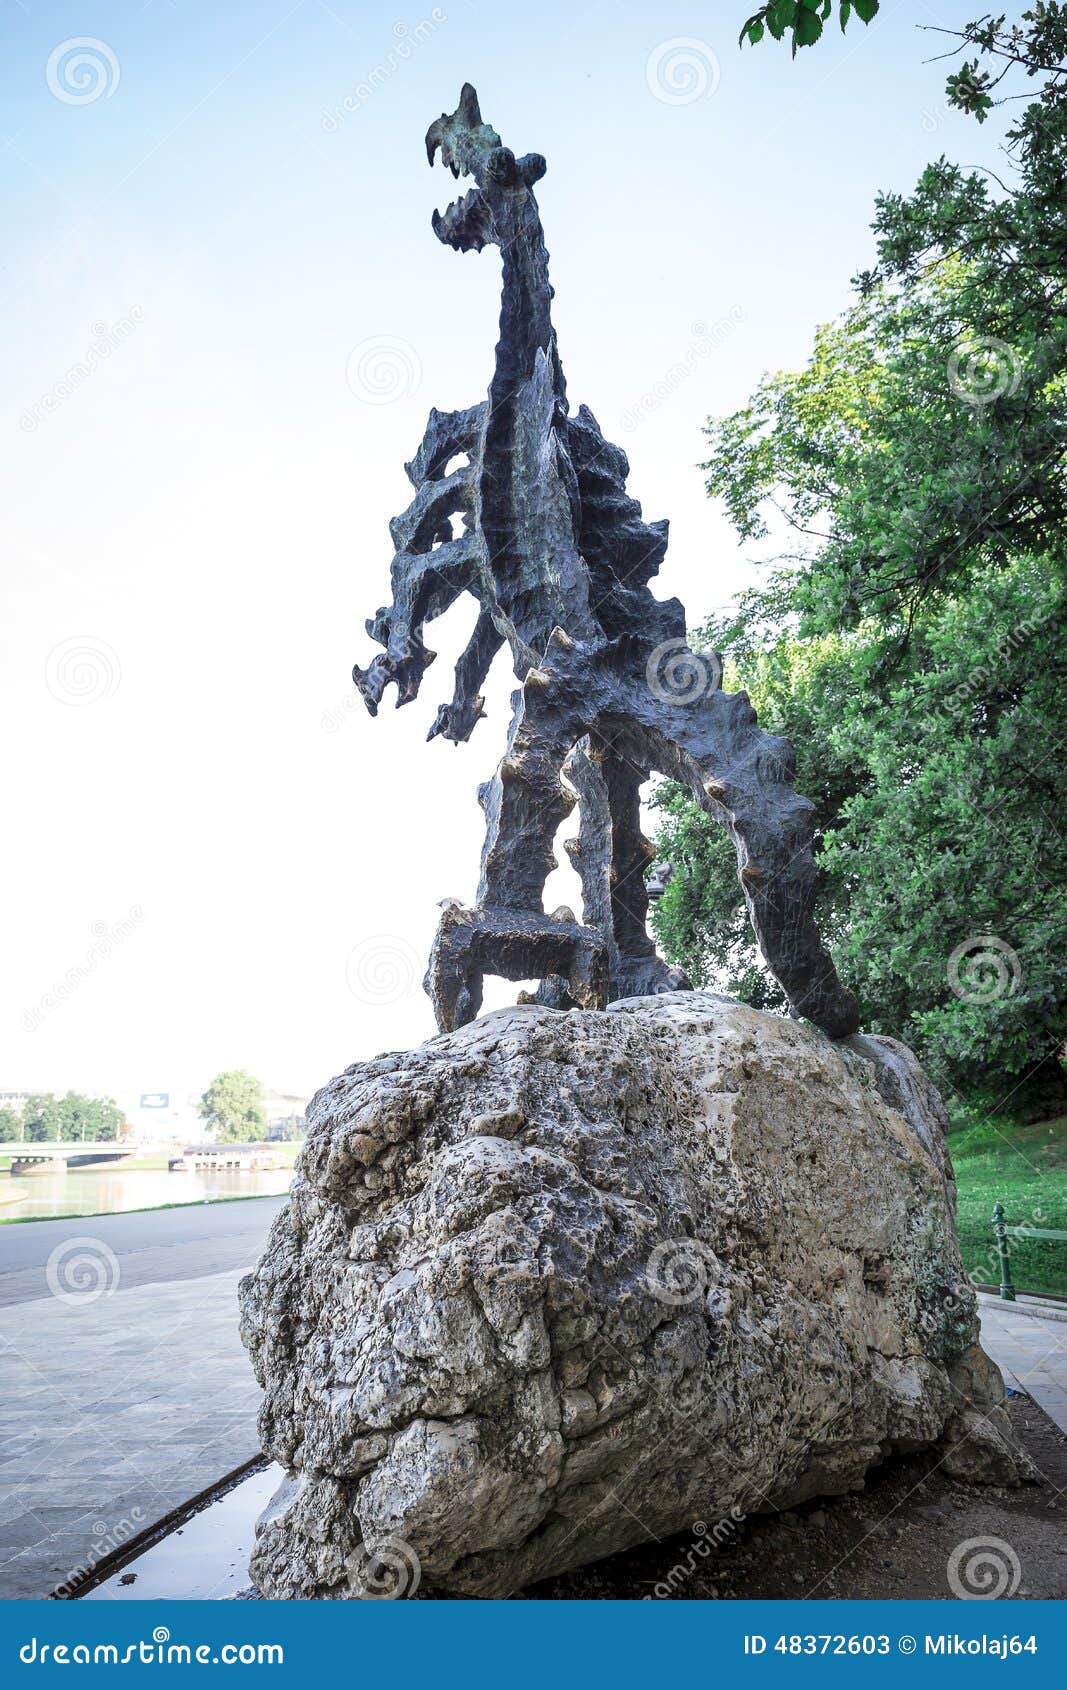 statue of the dragon from wawel castle